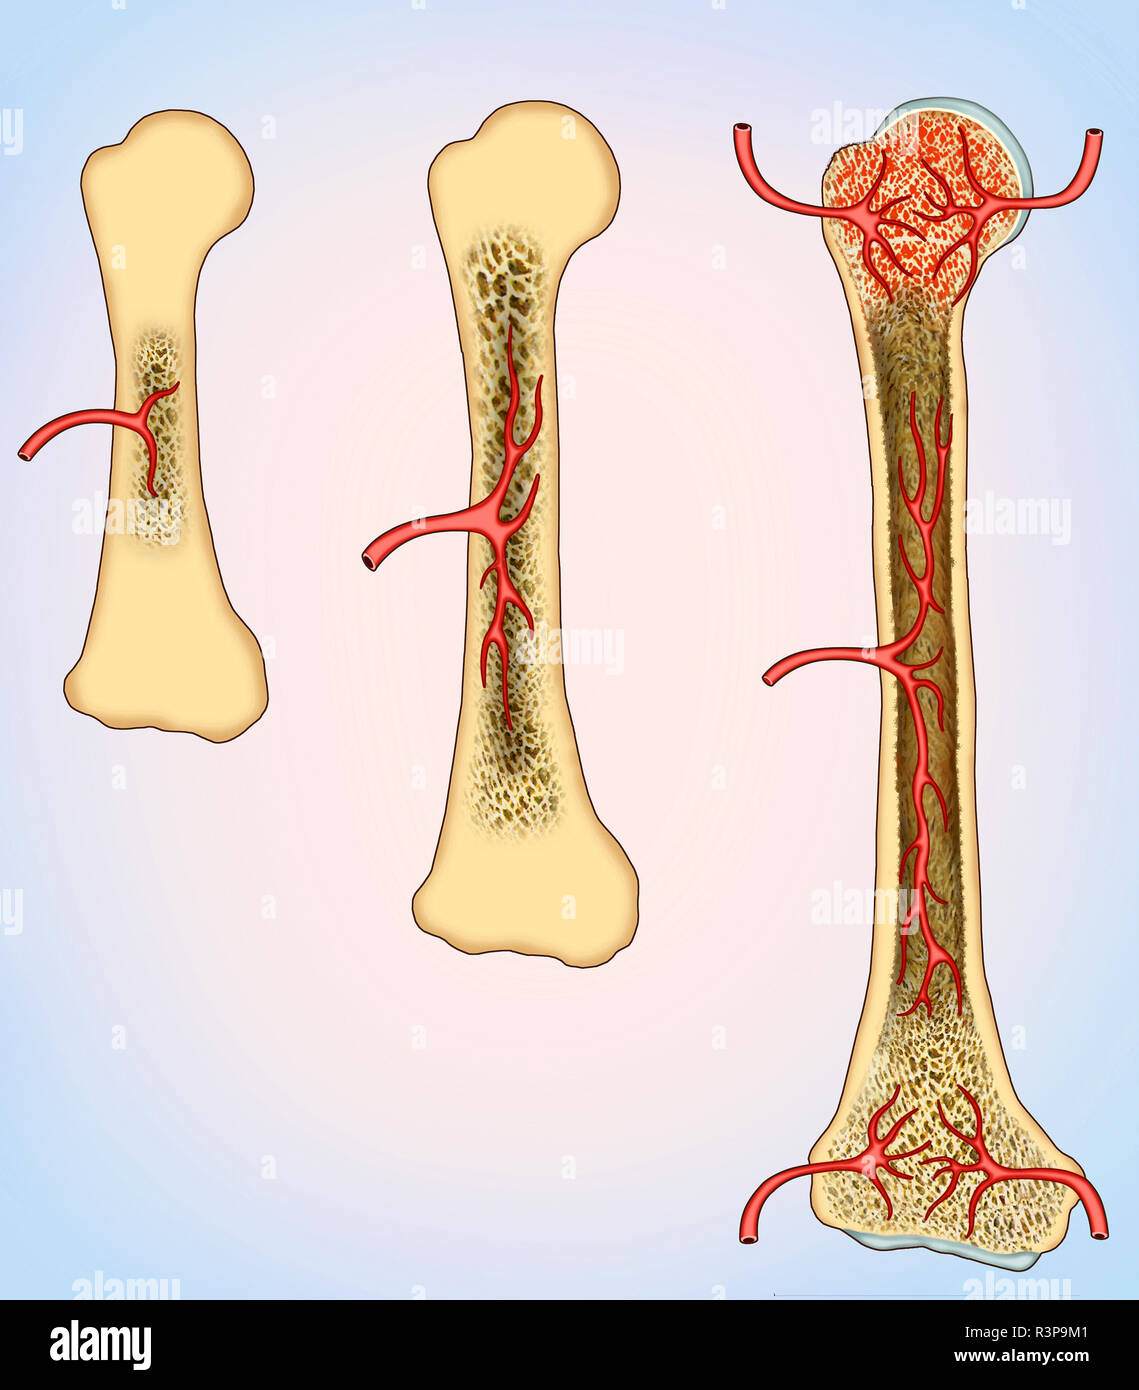 Illustration of the process of the formation of new bone tissue by cells called osteoblasts. It is related to growth factors and molecular proteins. Stock Photo